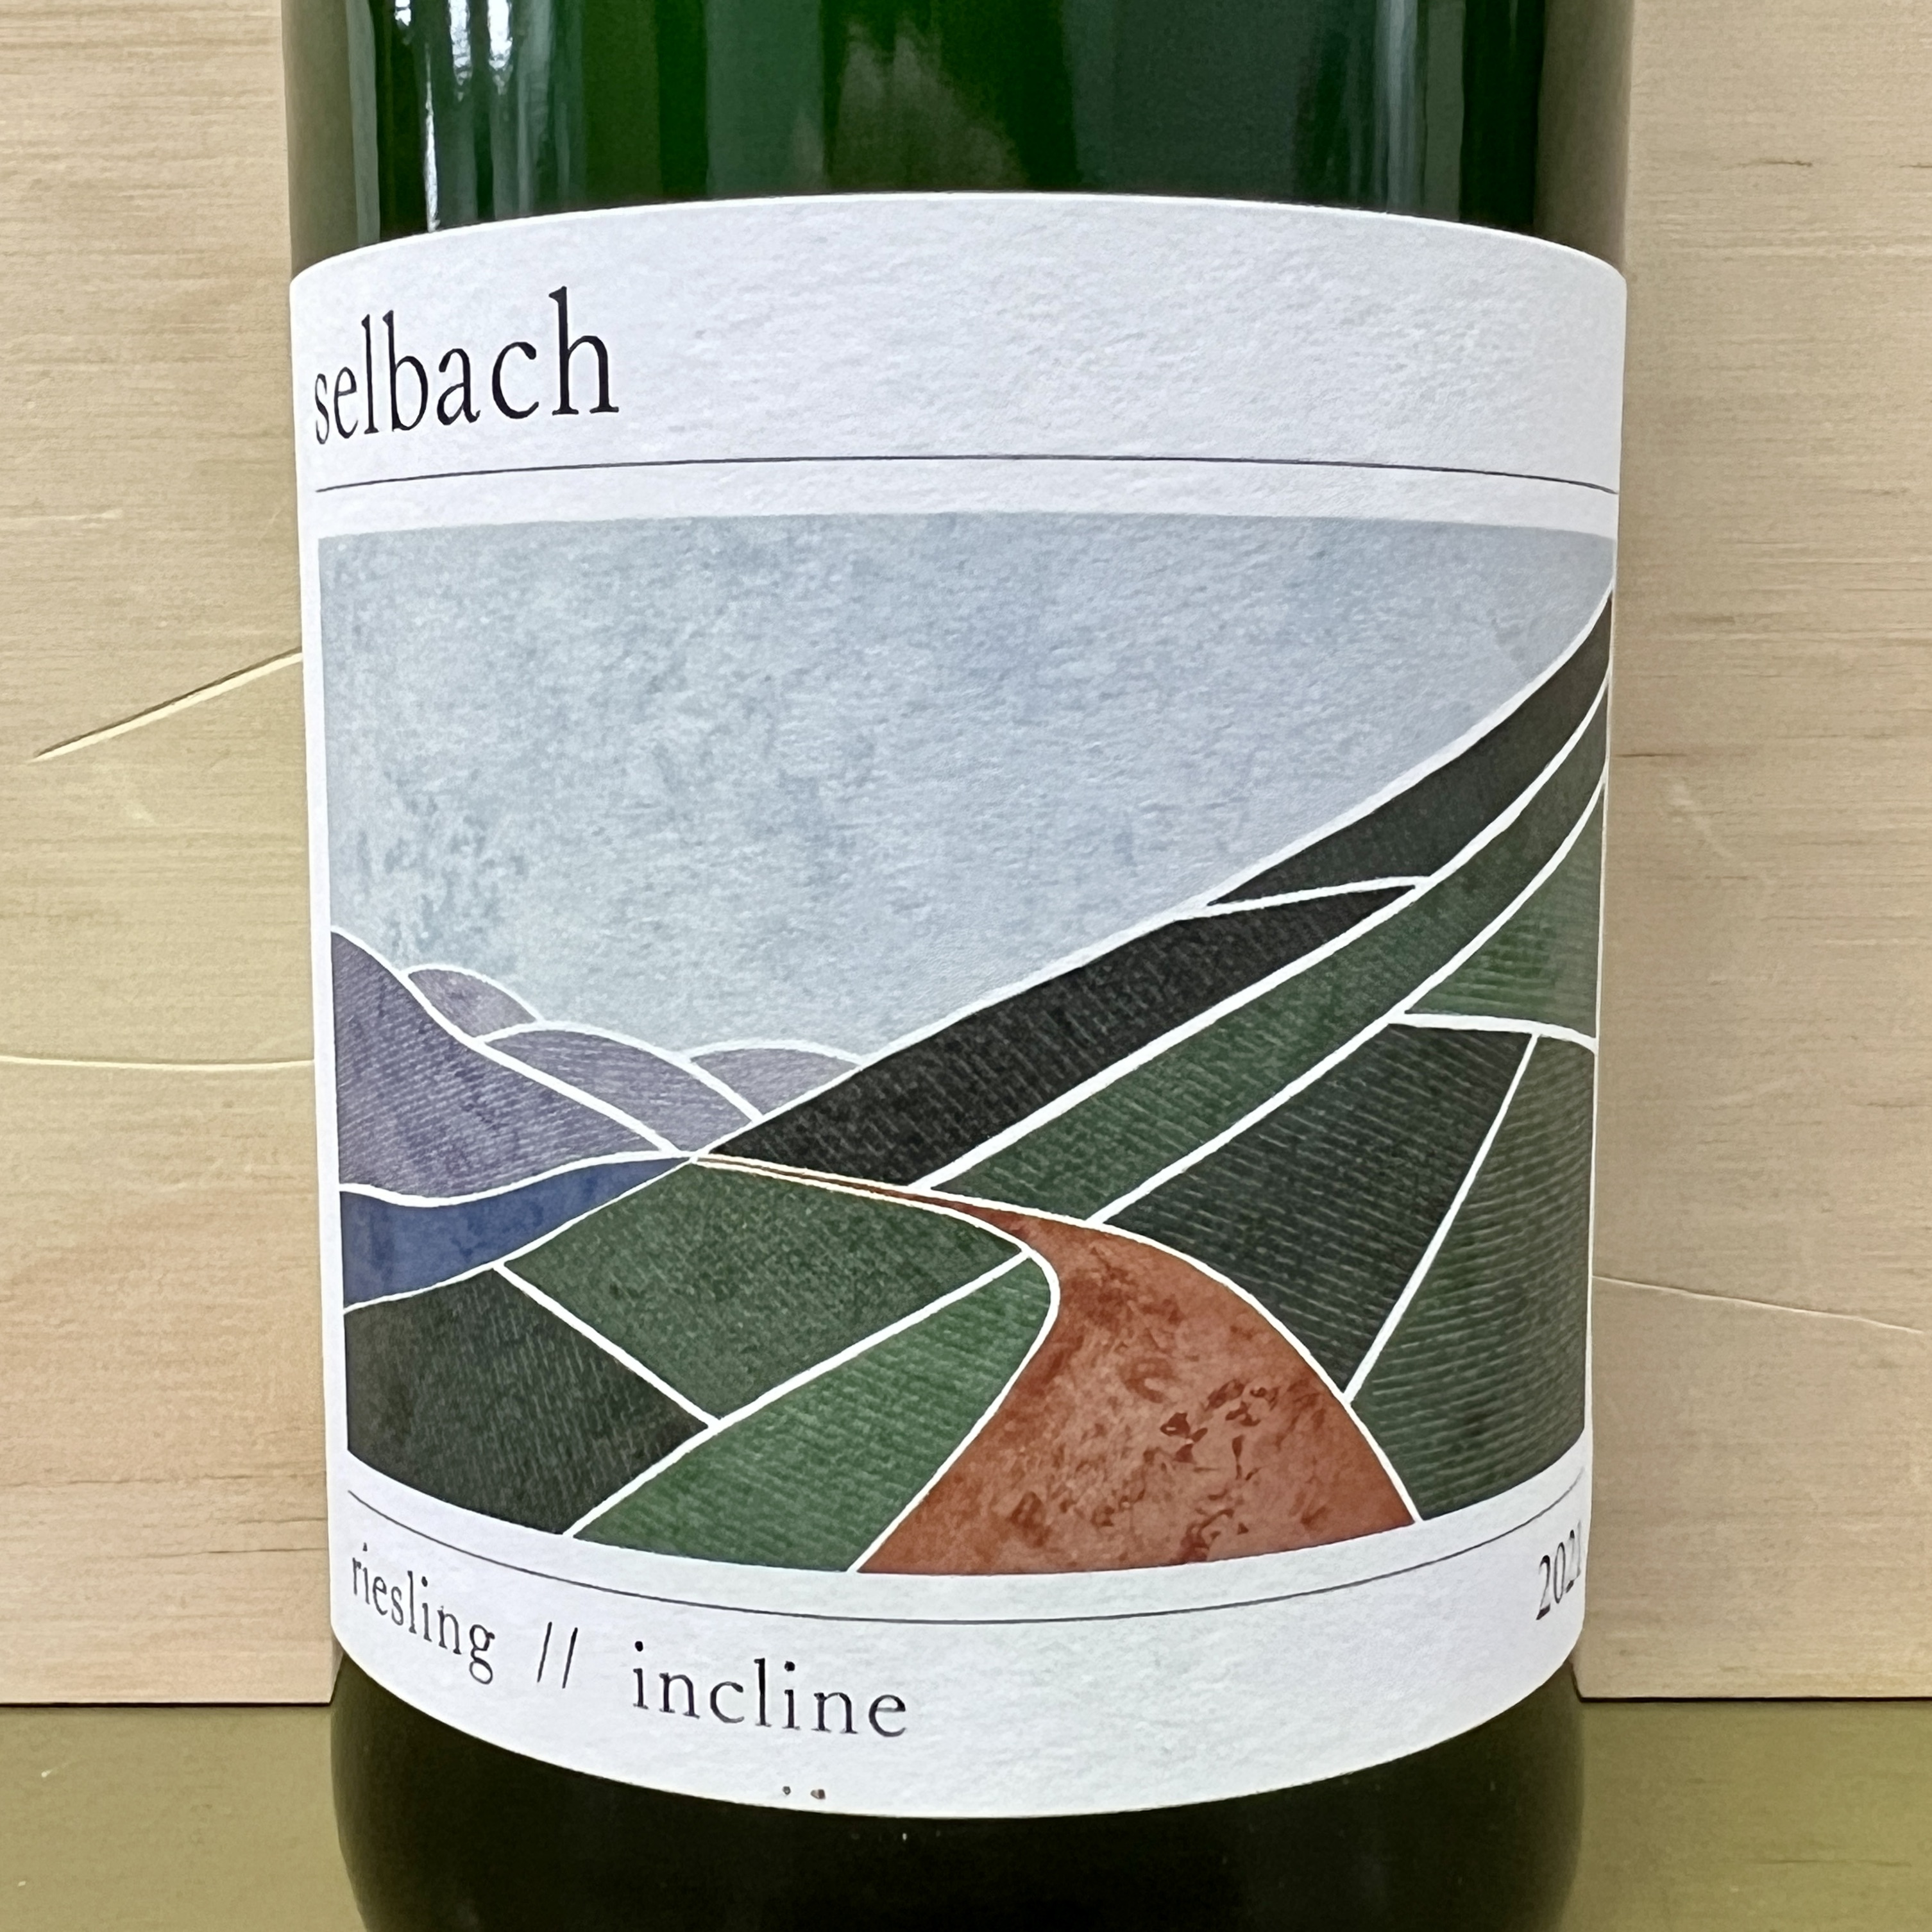 Selbach 'Incline' Riesling Mosel 2021 - Click Image to Close